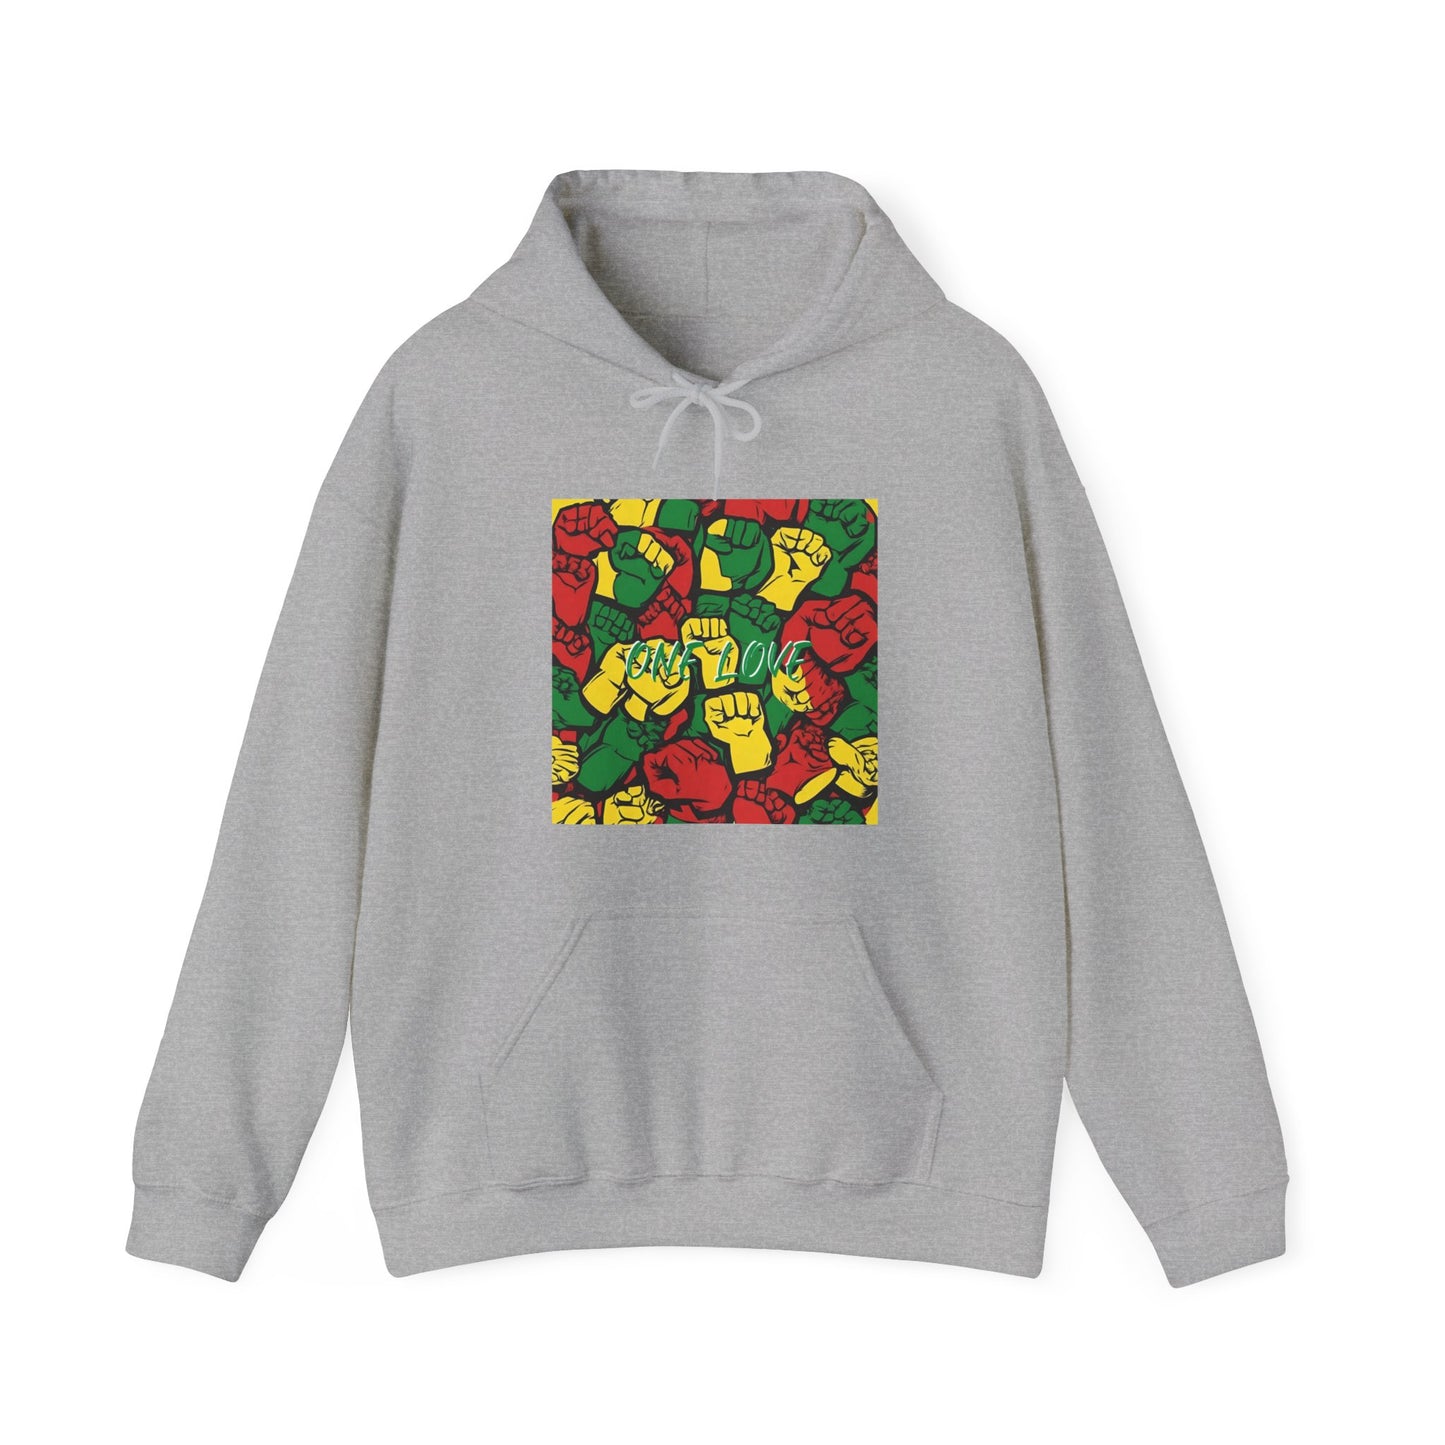 ONE LOVE FIST DESIGN HOODED SWEATSHIRT FOR ROOTS LOVERS